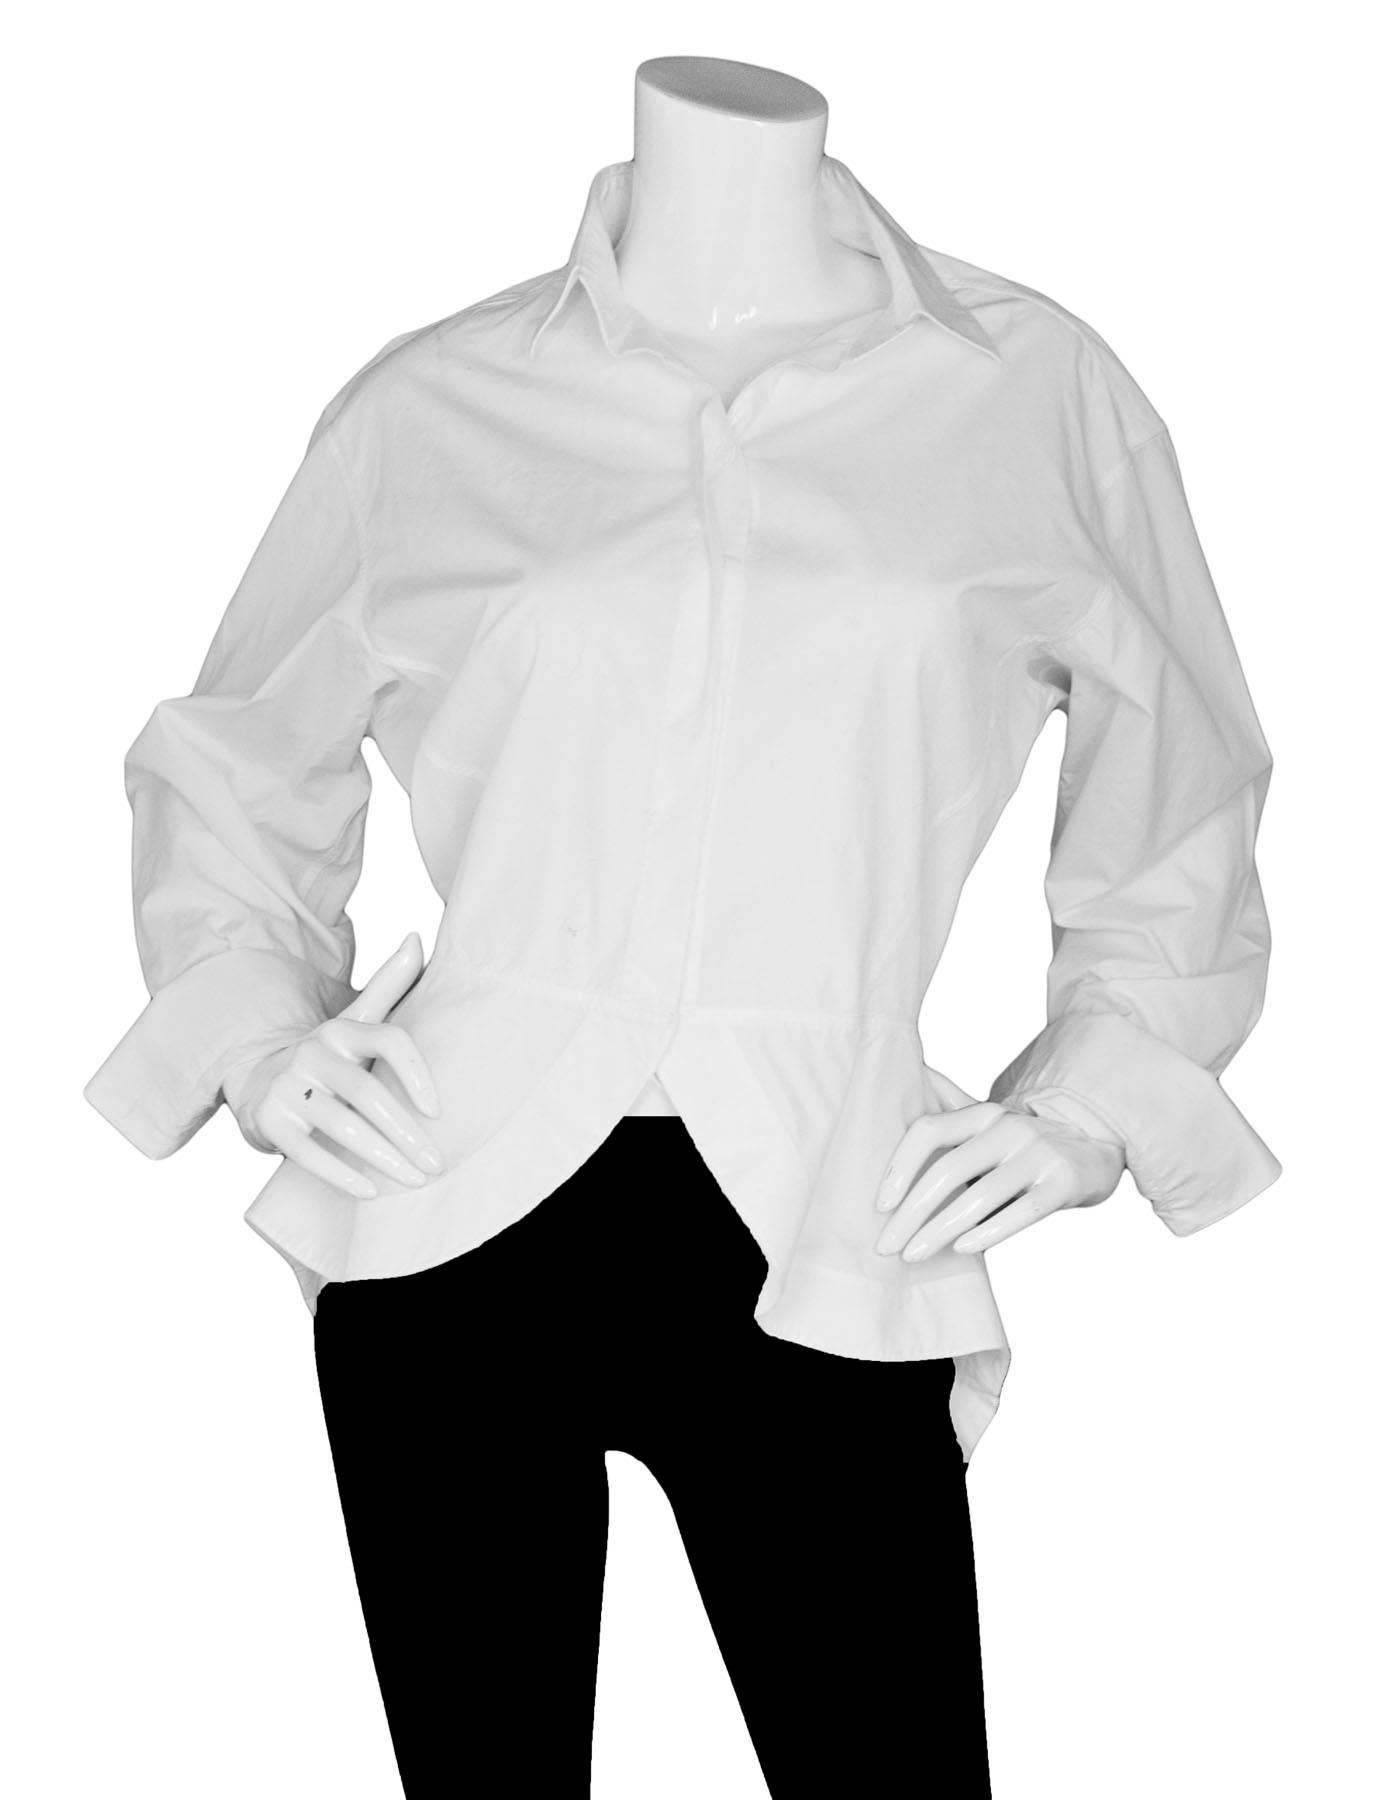 Alaia White Peplum Blouse Sz FR44

Made In: Italy
Color: White
Composition: 100% Cotton
Lining: None
Closure/Opening: Front button closure
Exterior Pockets: None
Interior Pockets: None
Overall Condition: Excellent pre-owned condition with the